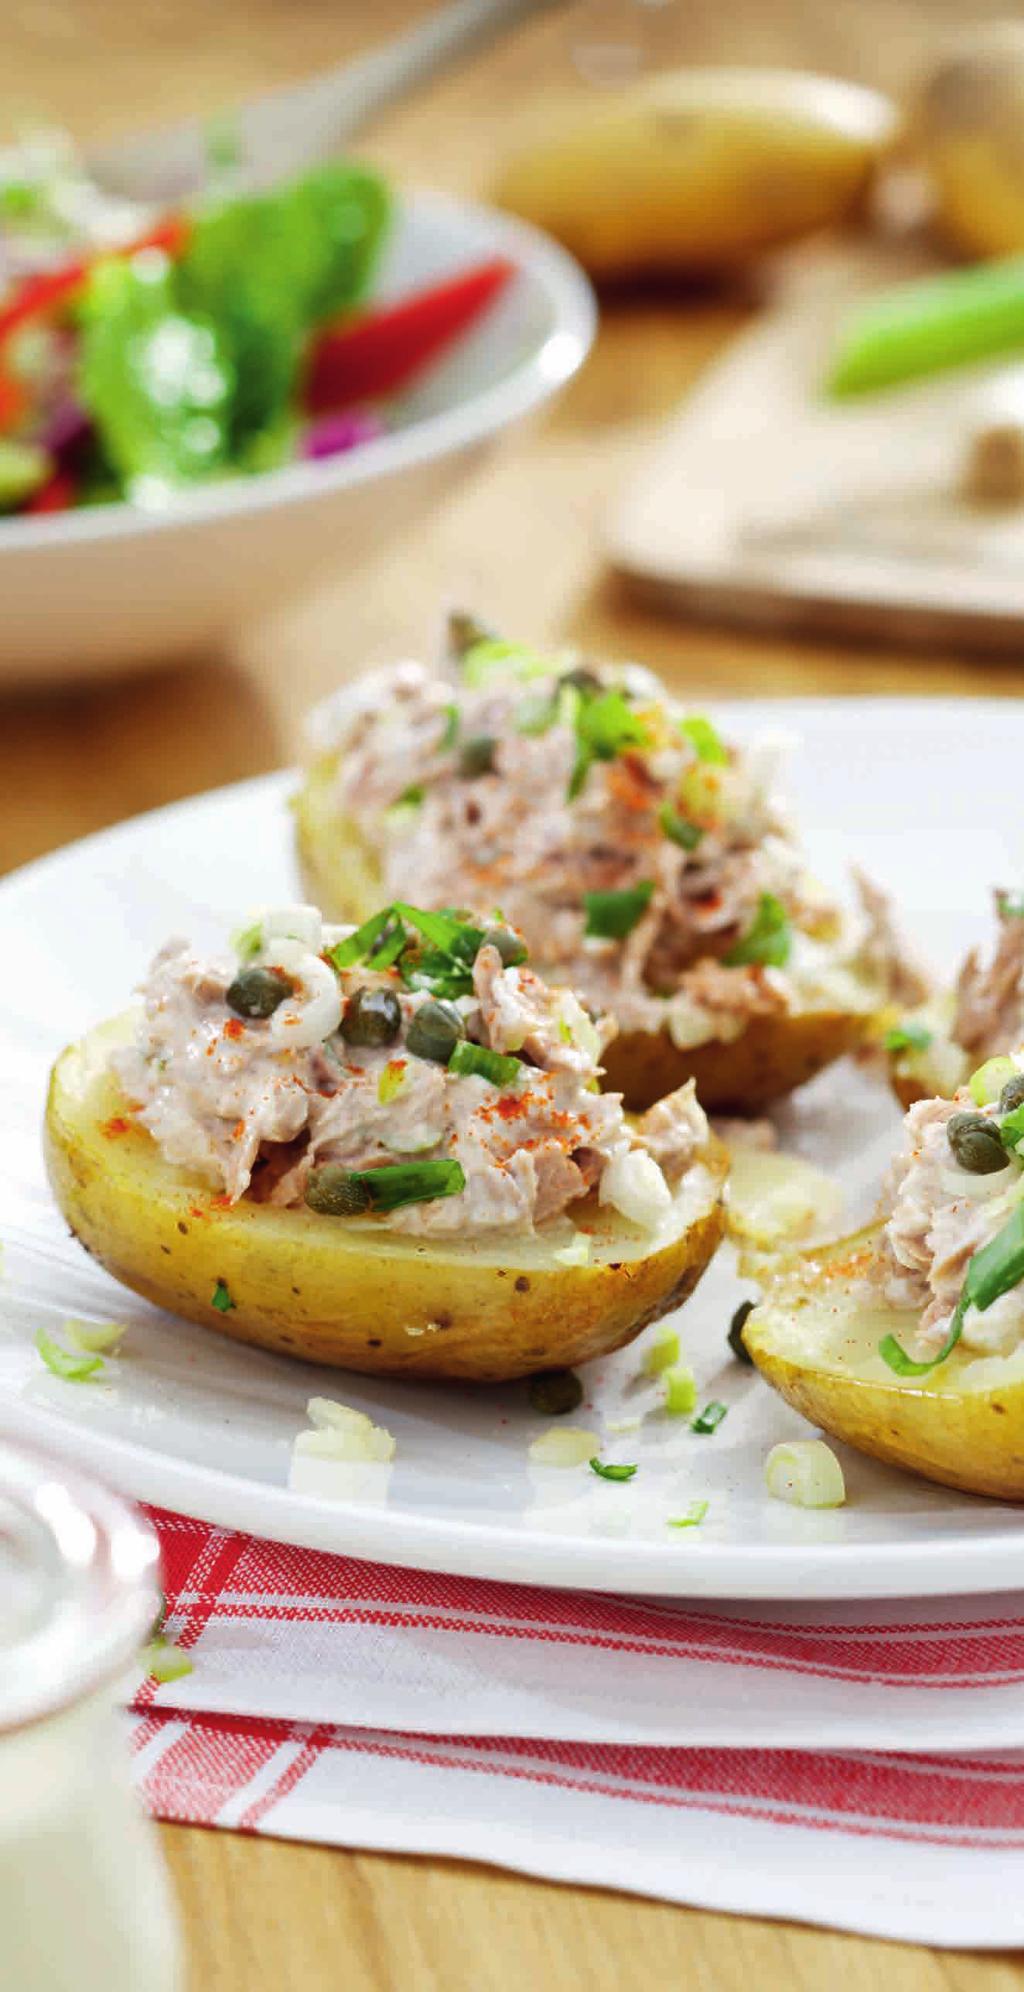 Rösti Roast Potatoes with Tuna Appetizer - 4 portions 10 minutes + 15 minutes airfryer 250 g waxy potatoes, peeled 1 tablespoon chives, finely chopped 1 tablespoon olive oil 2 tablespoons sour cream